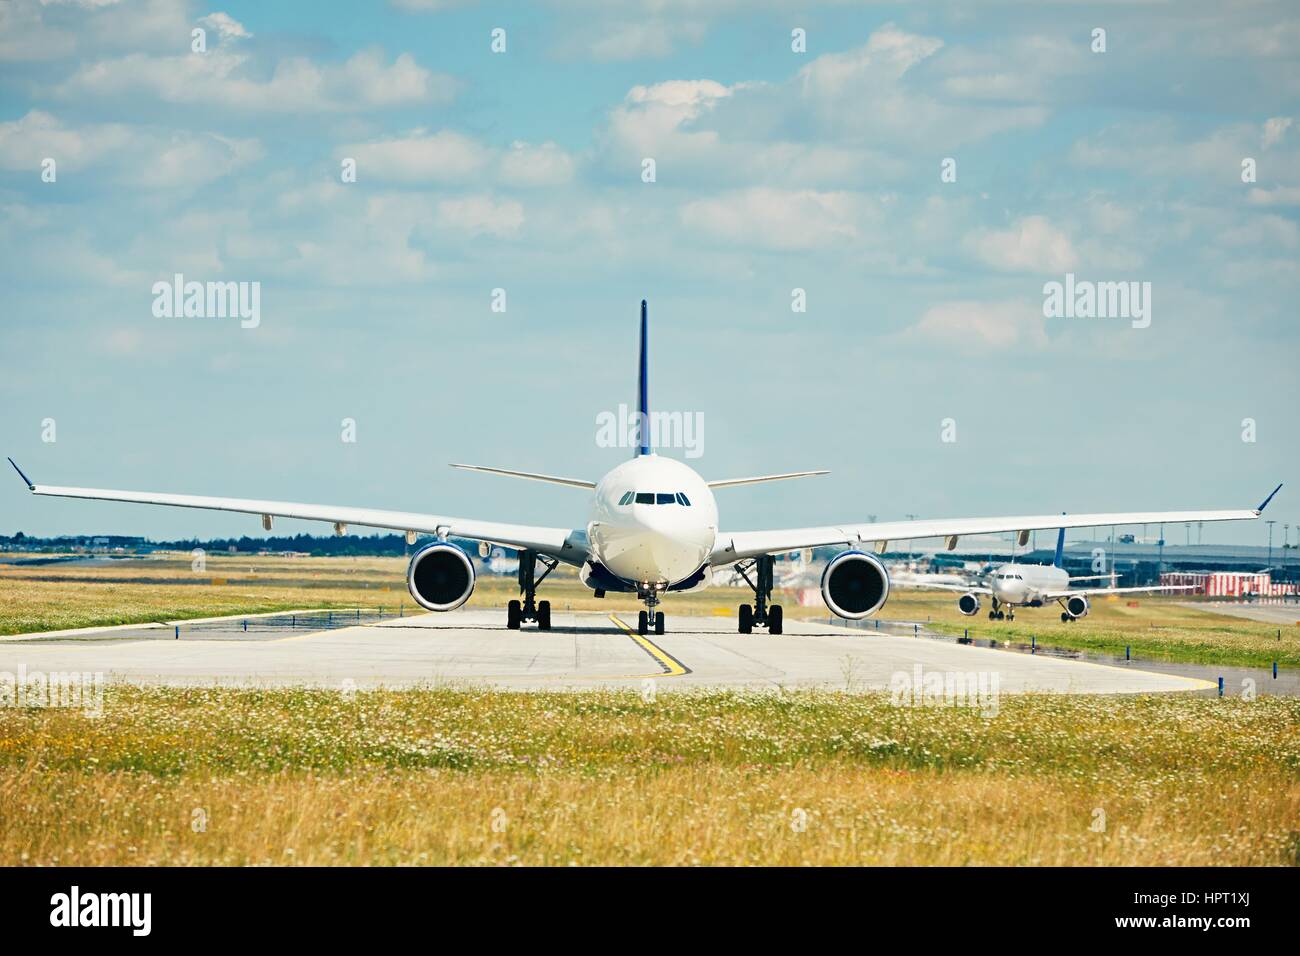 Traffic at the airport. Airplanes are taxiing to the runway for take off. Stock Photo